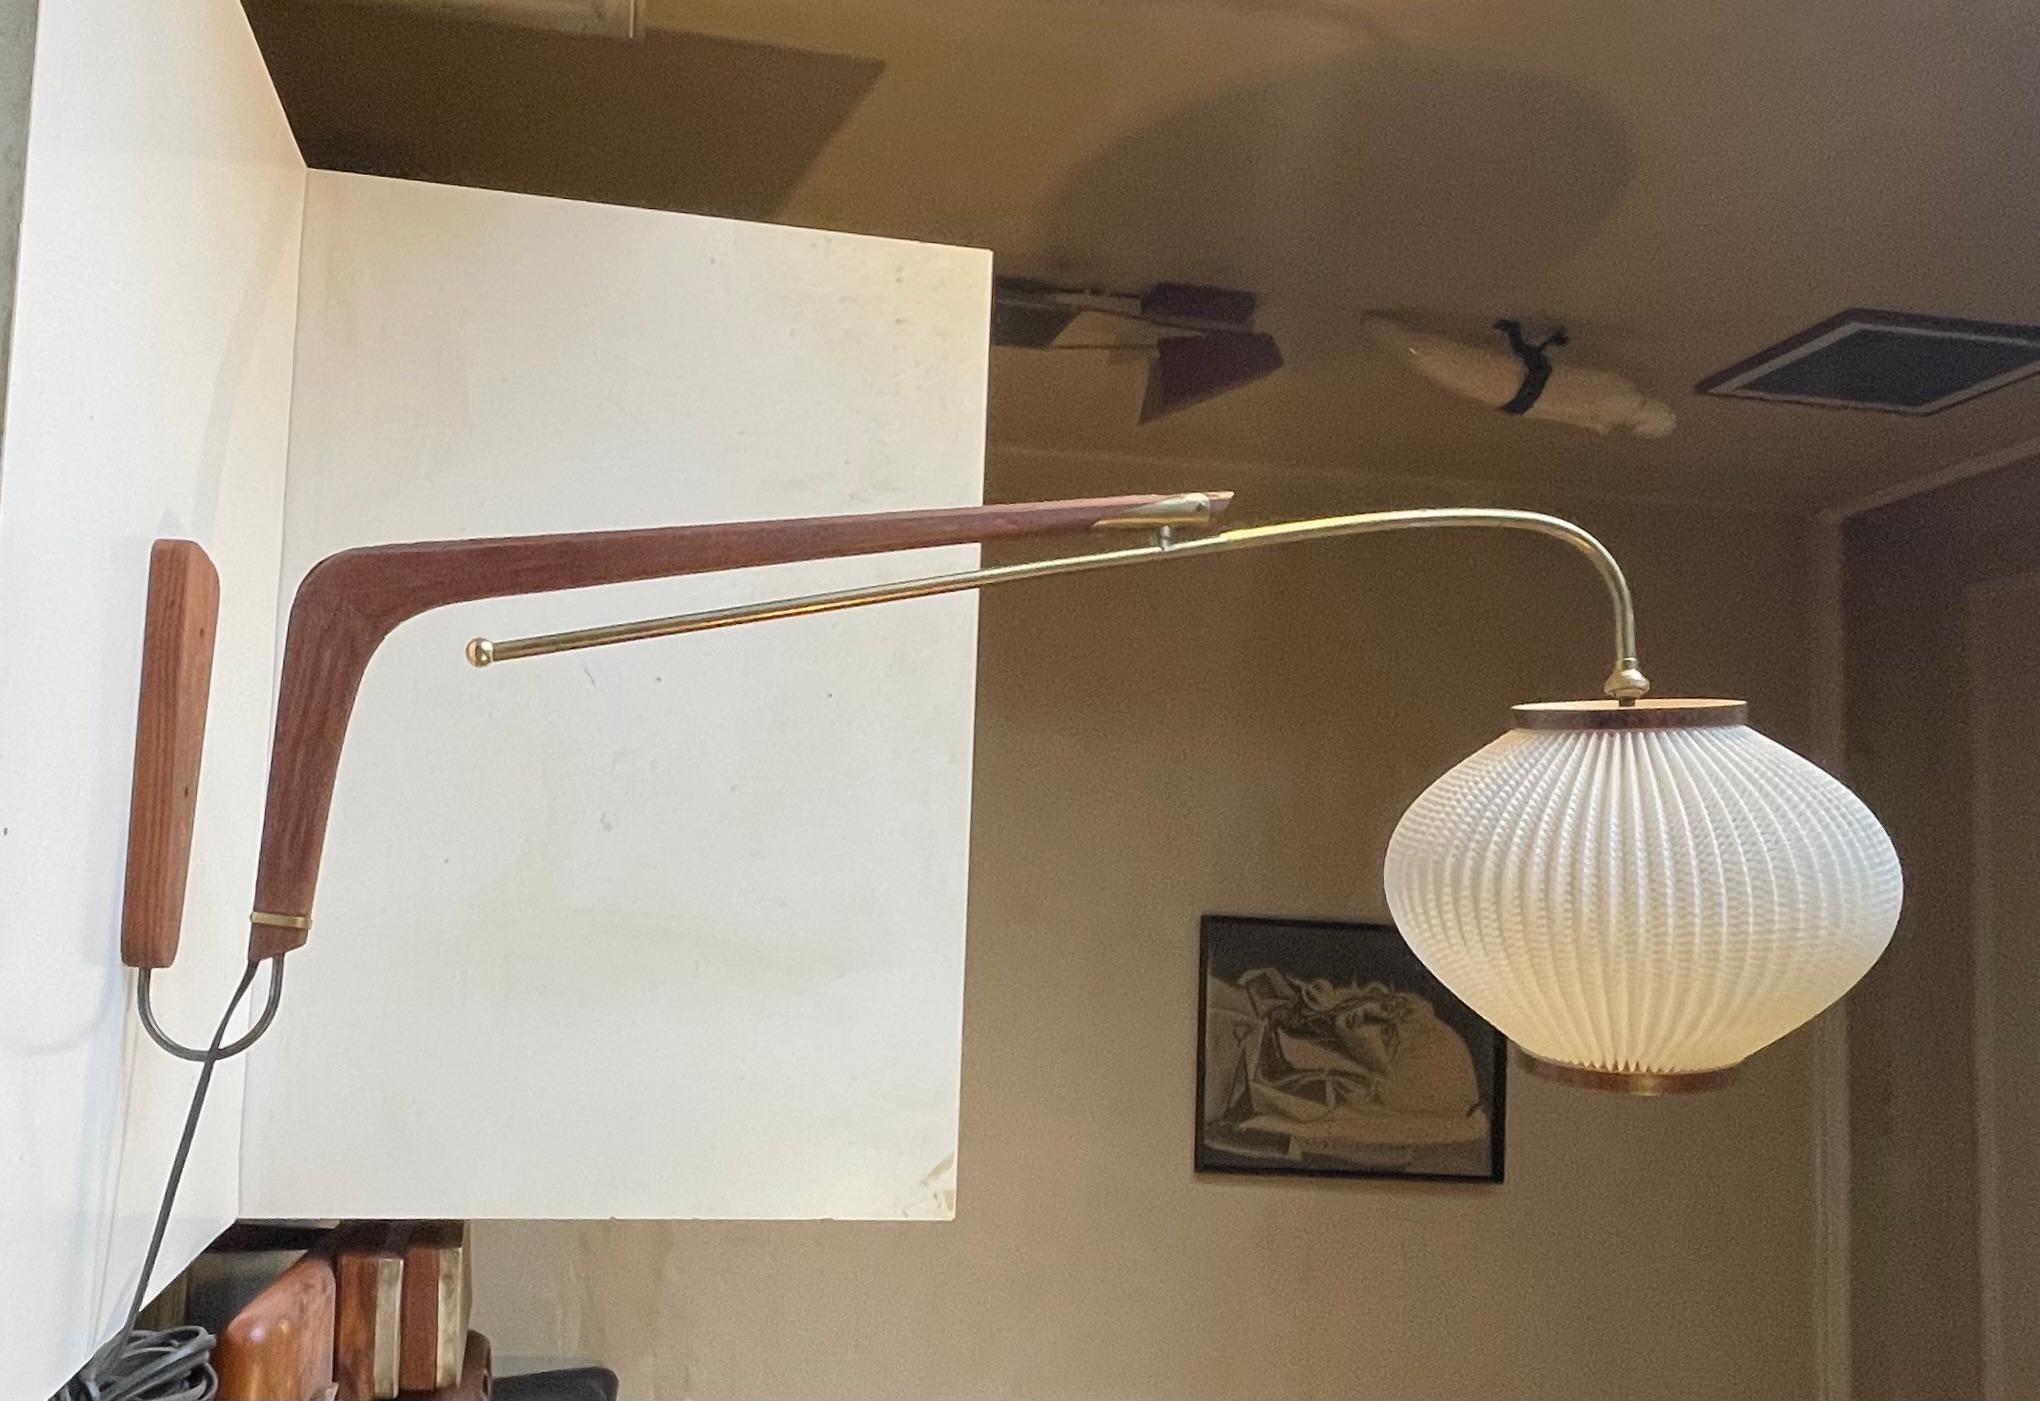 Svend Aage Holm Sørensen Large Articulated Wall Lamp in Teak and Brass, 1950s For Sale 2